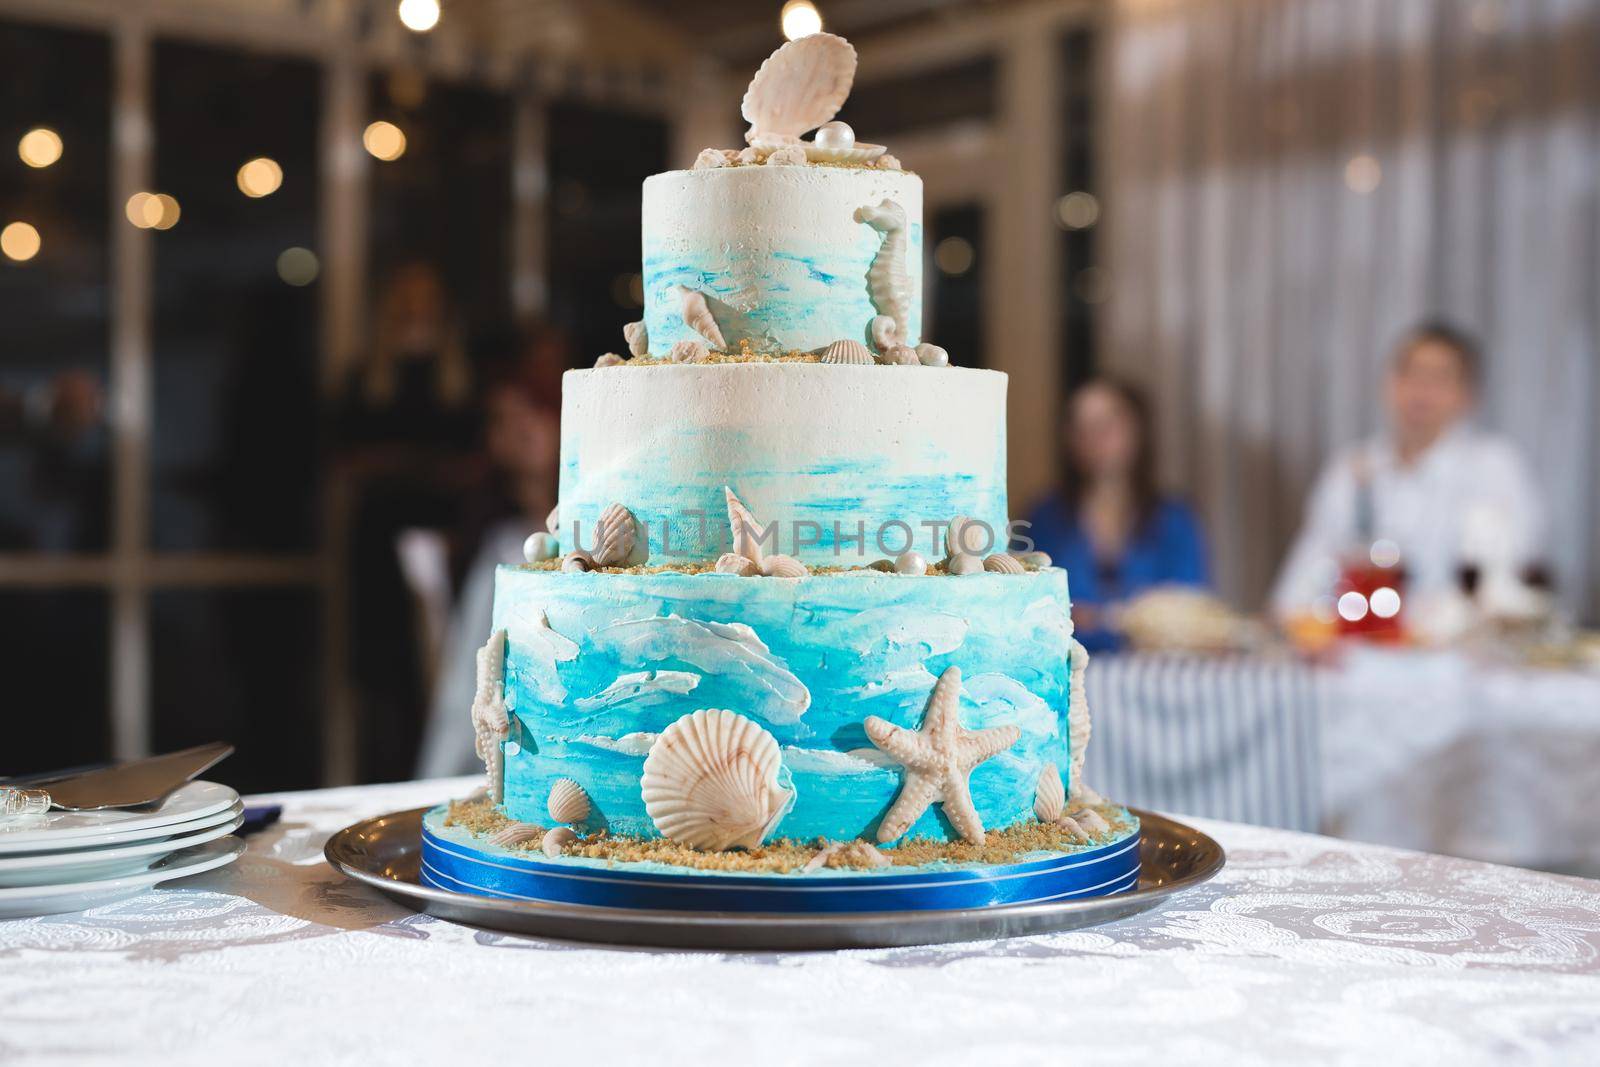 A beautiful wedding cake for newlyweds at a wedding in a nautical style. A birthday cake at a banquet.